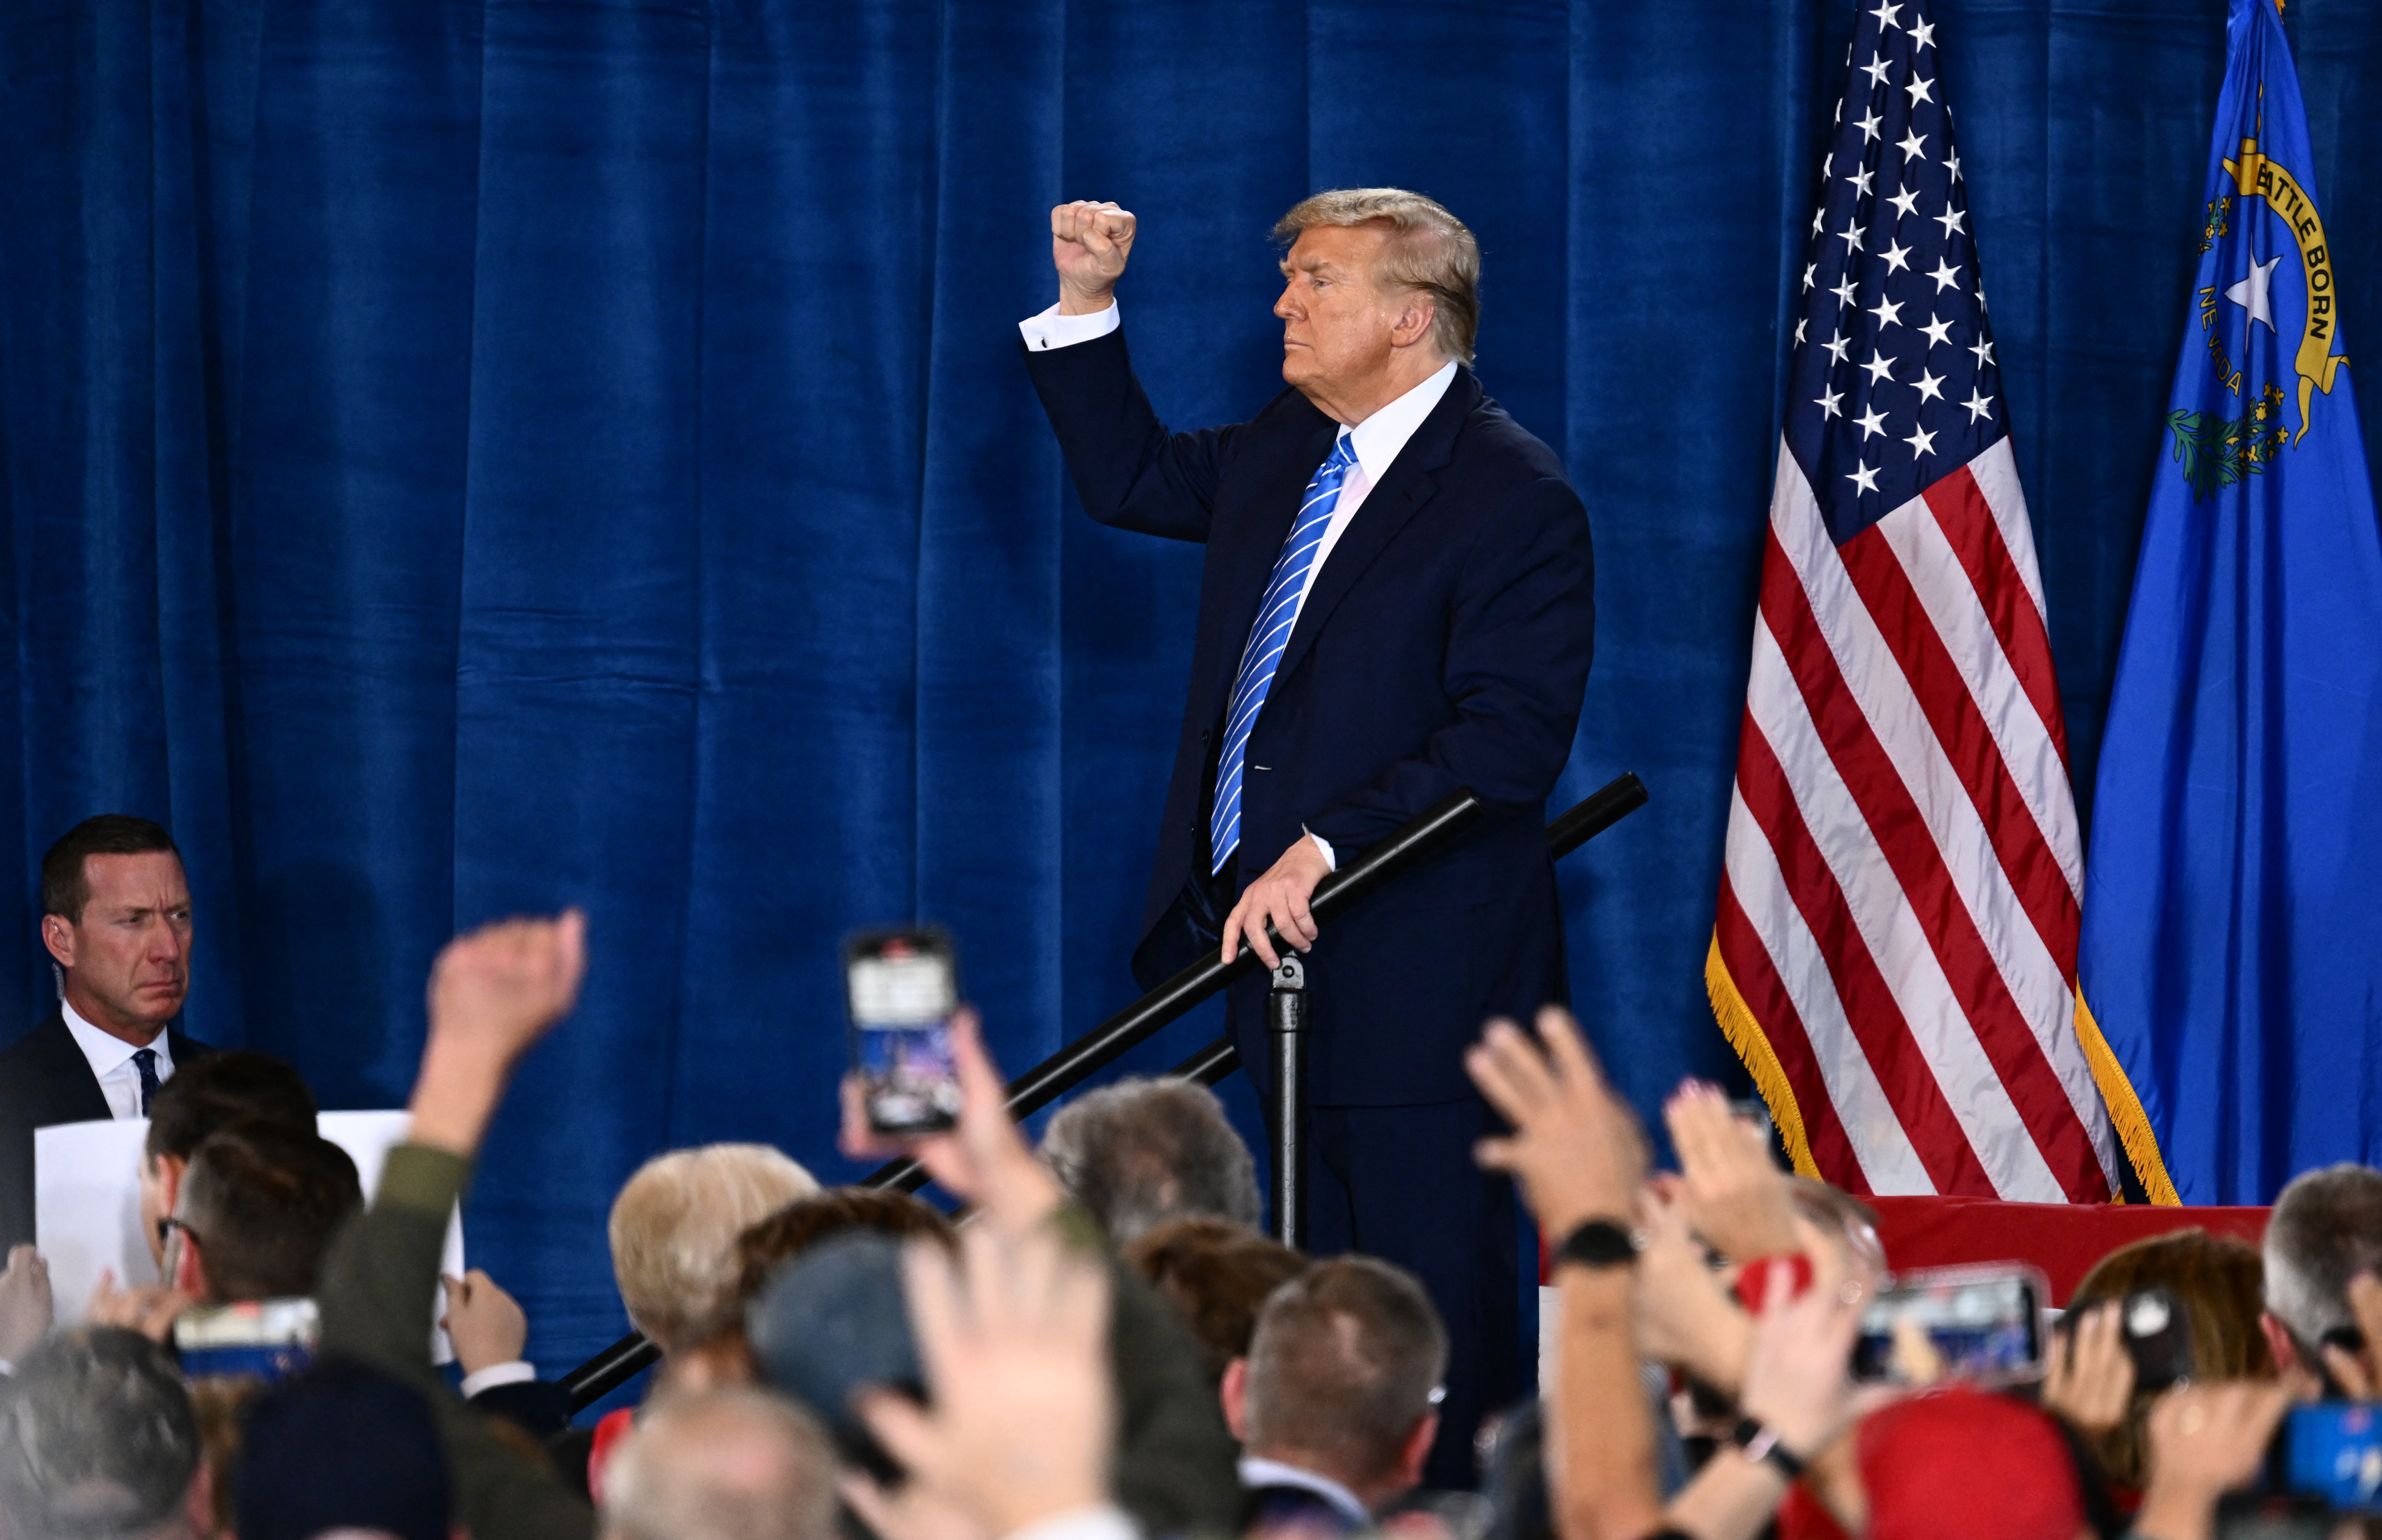 Former President Donald Trump raises his fist after speaking at a rally in Las Vegas on January 27.